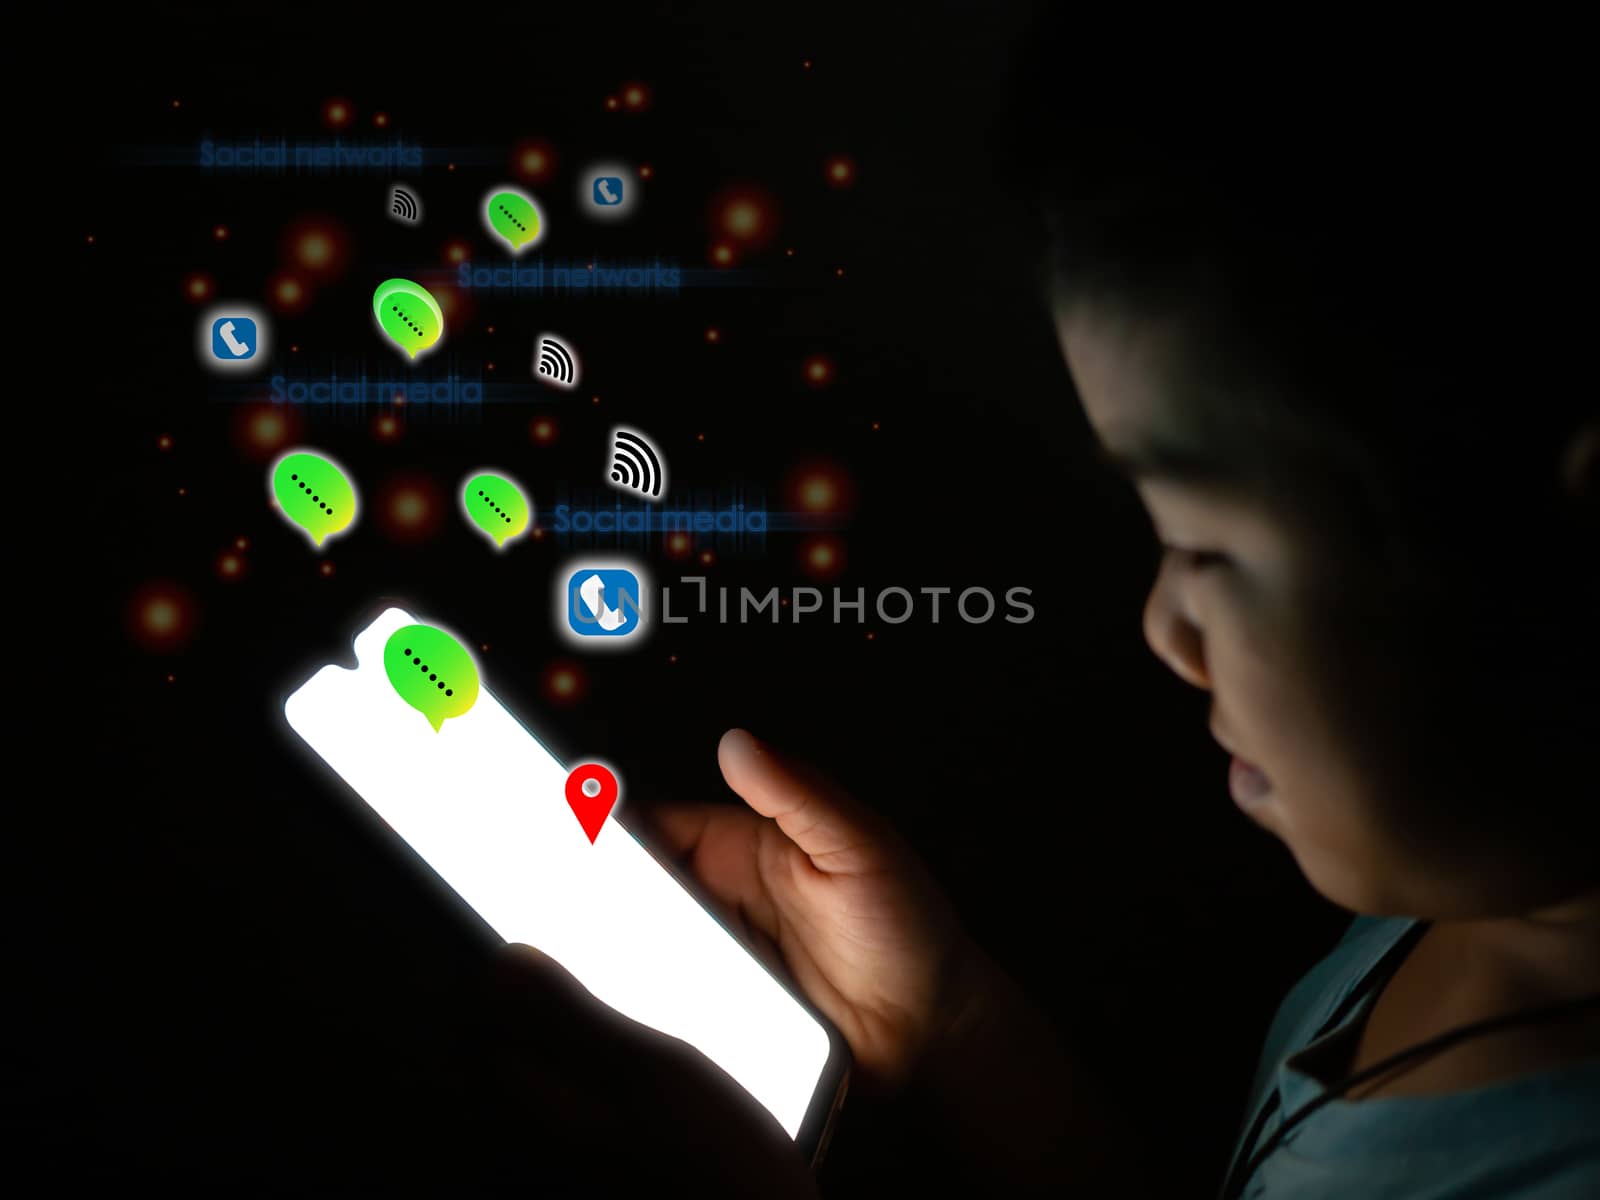 Boy holding The phone screen is blank And has a social media ico by Unimages2527